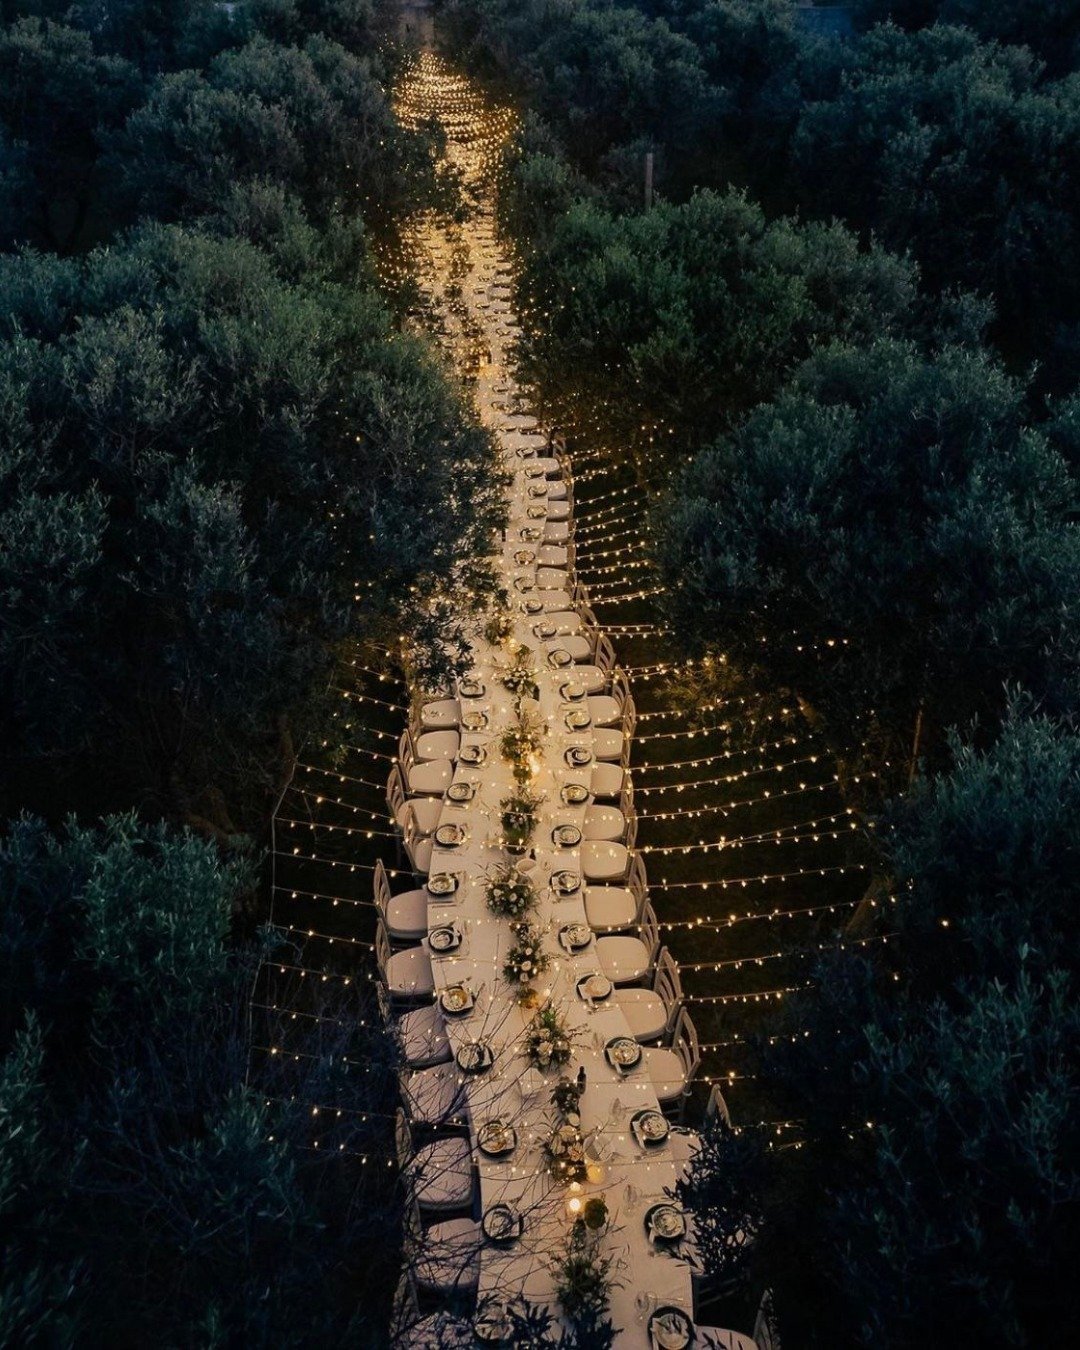 This spectacularly long table brings a &lsquo;wow&rsquo; factor to this idyllic dining setting. This collective and immersive arrangement is guaranteed to create a truly unforgettable dining experience.

Via @zonzo_ph

#jcbespokeevents 

#ibiza
#ibiz